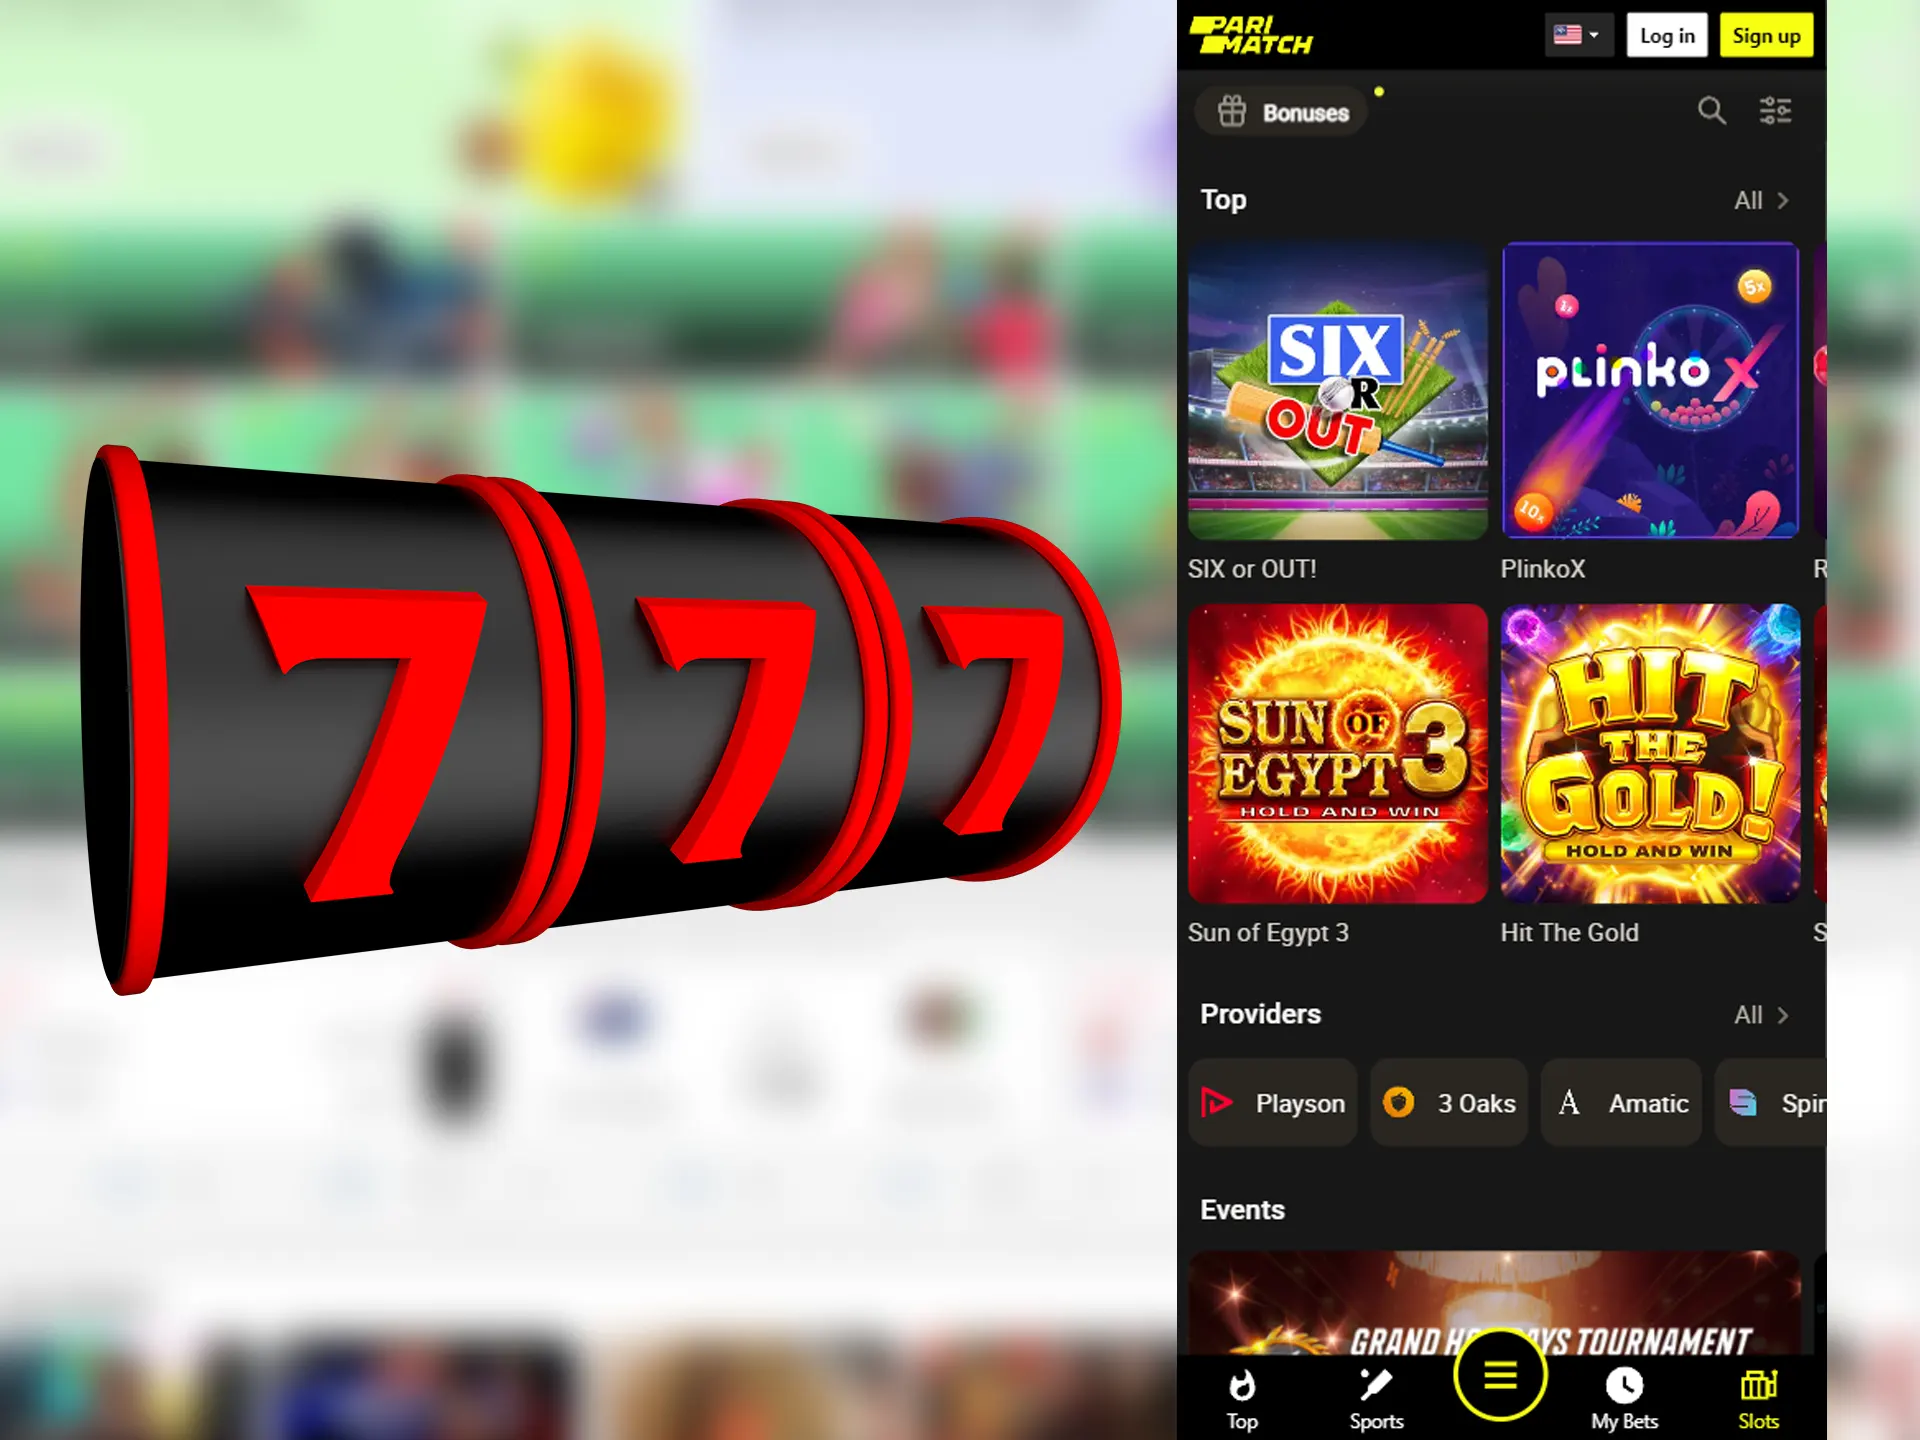 Check for your favourite slots that available for playing.